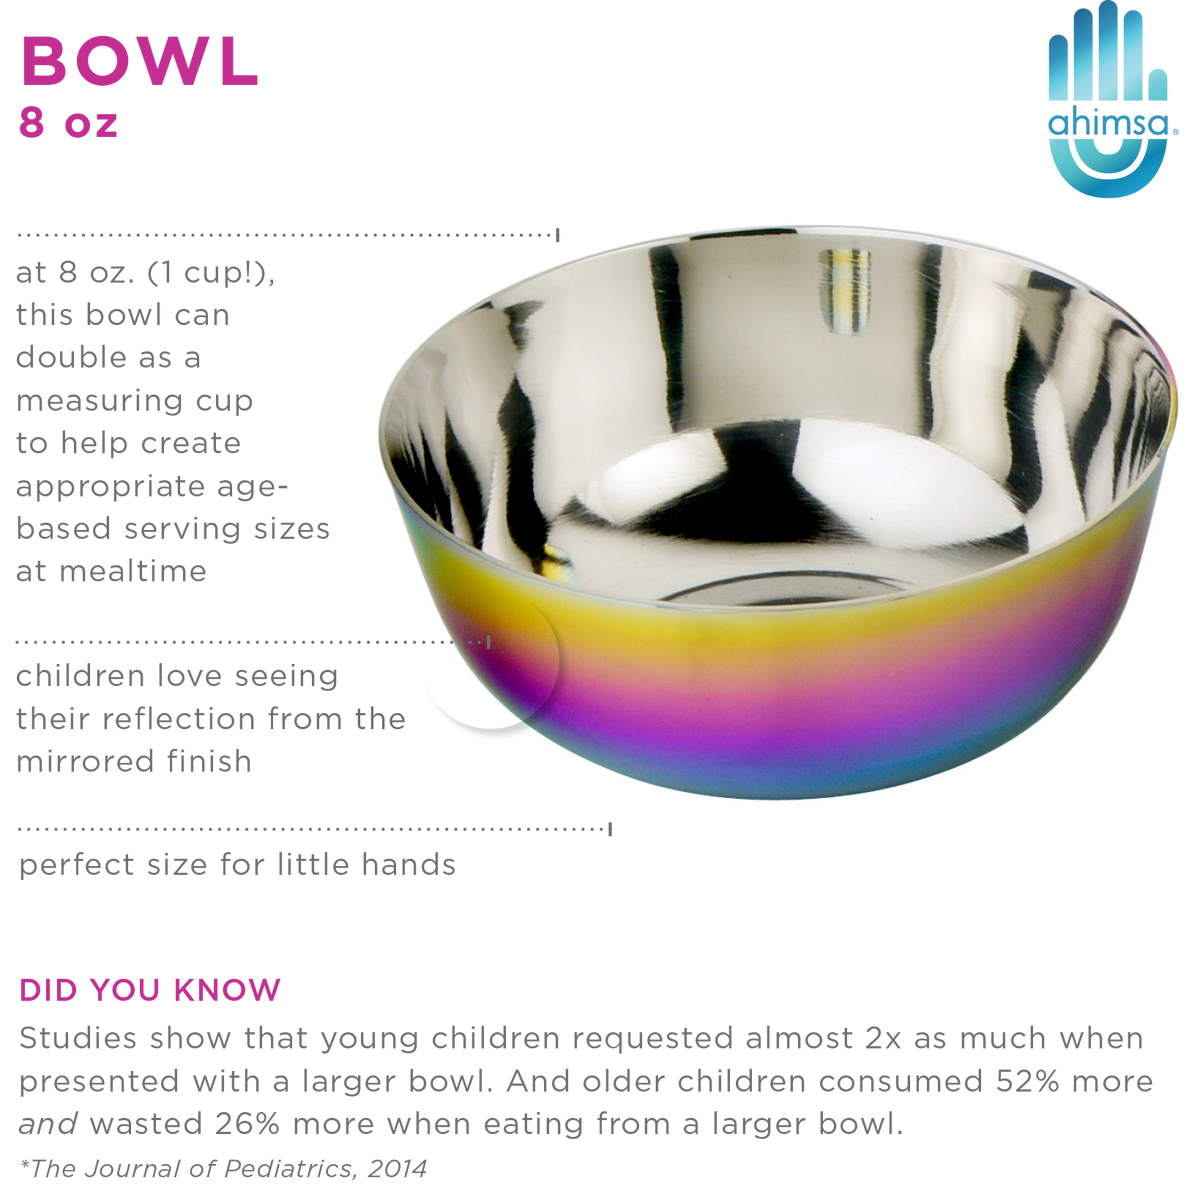 8 oz bowl makes figuring out serving sizes easy - perfect for little hands